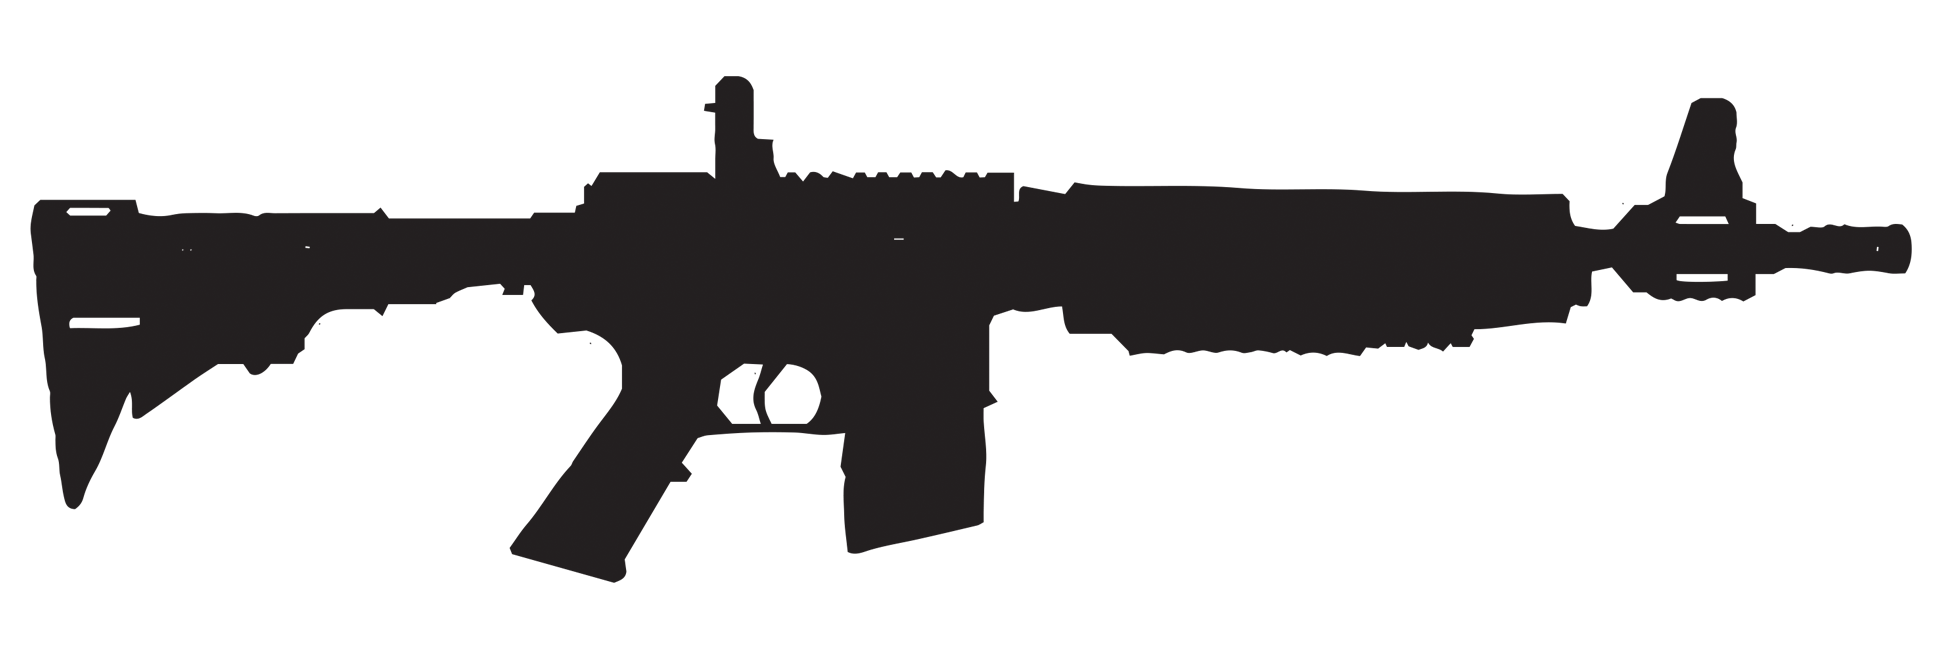 Ar 15 Png